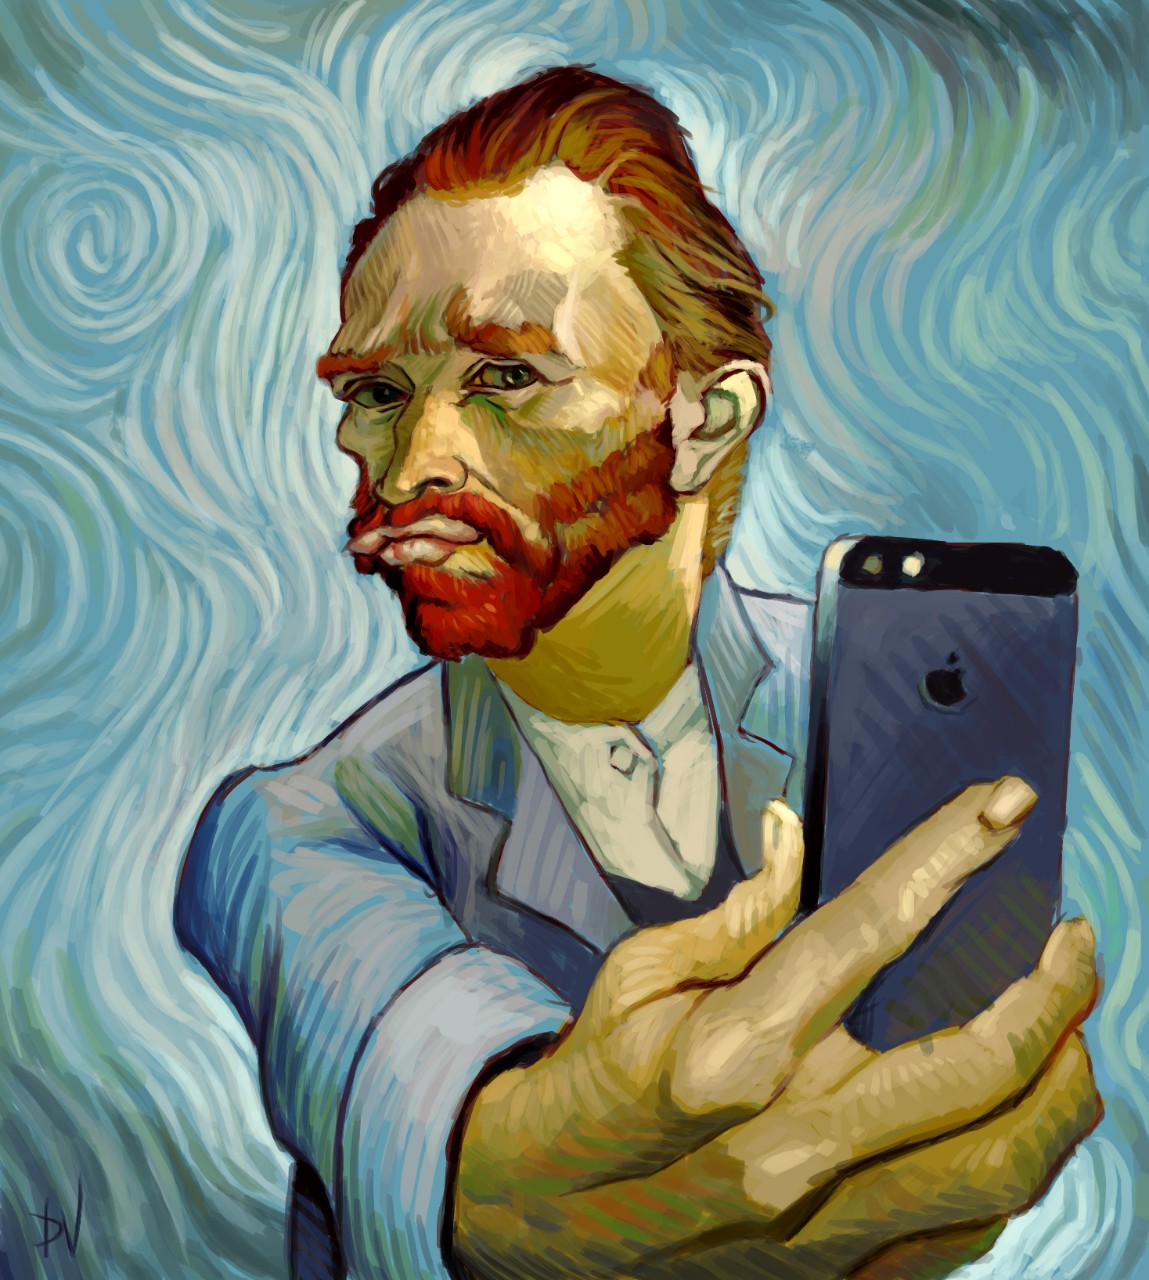 From Self Portraits to Selfies: The Evolution of Self Expression